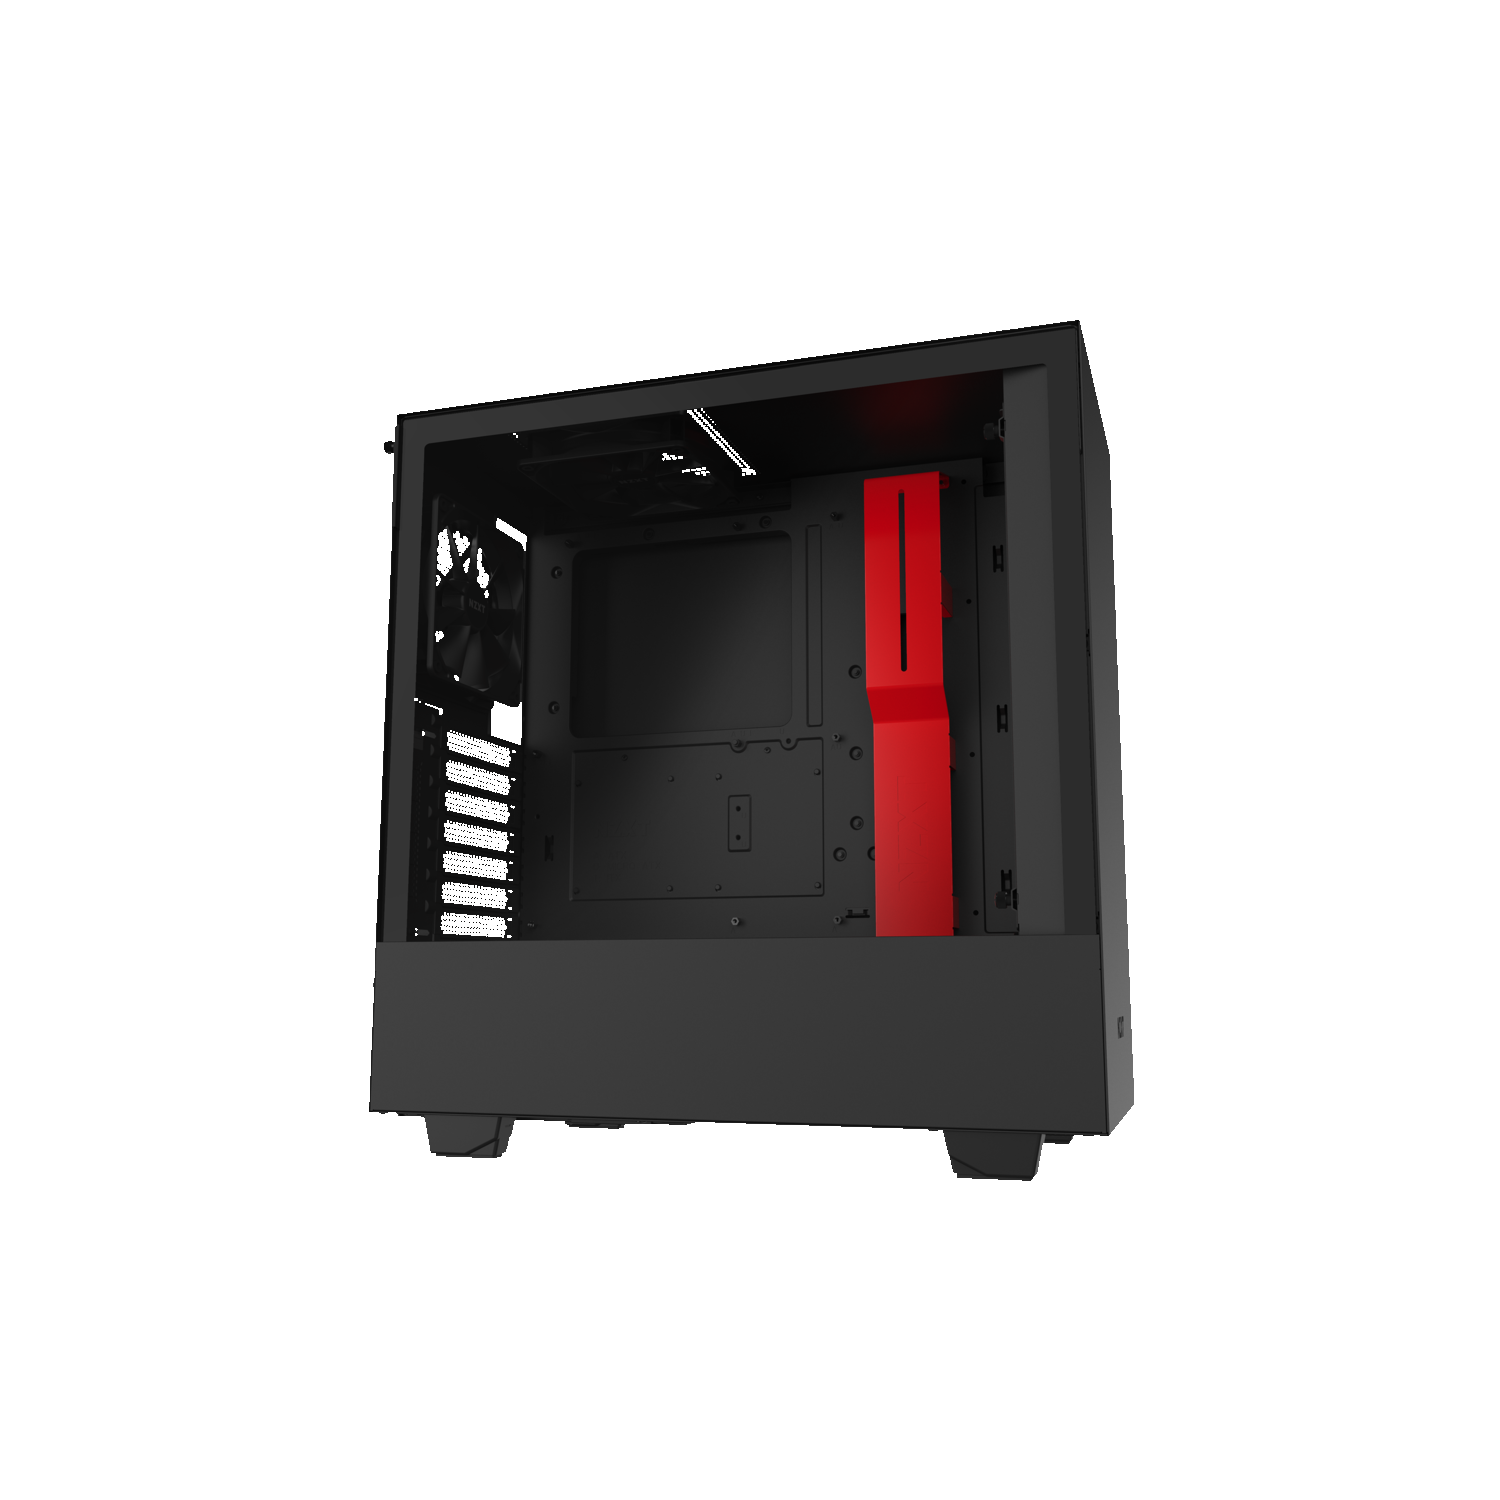 NZXT H510 - Compact ATX Mid-Tower Case - Front I/O USB Type-C Port - Tempered Glass Side Panel - Black/Red (CA-H510B-BR)